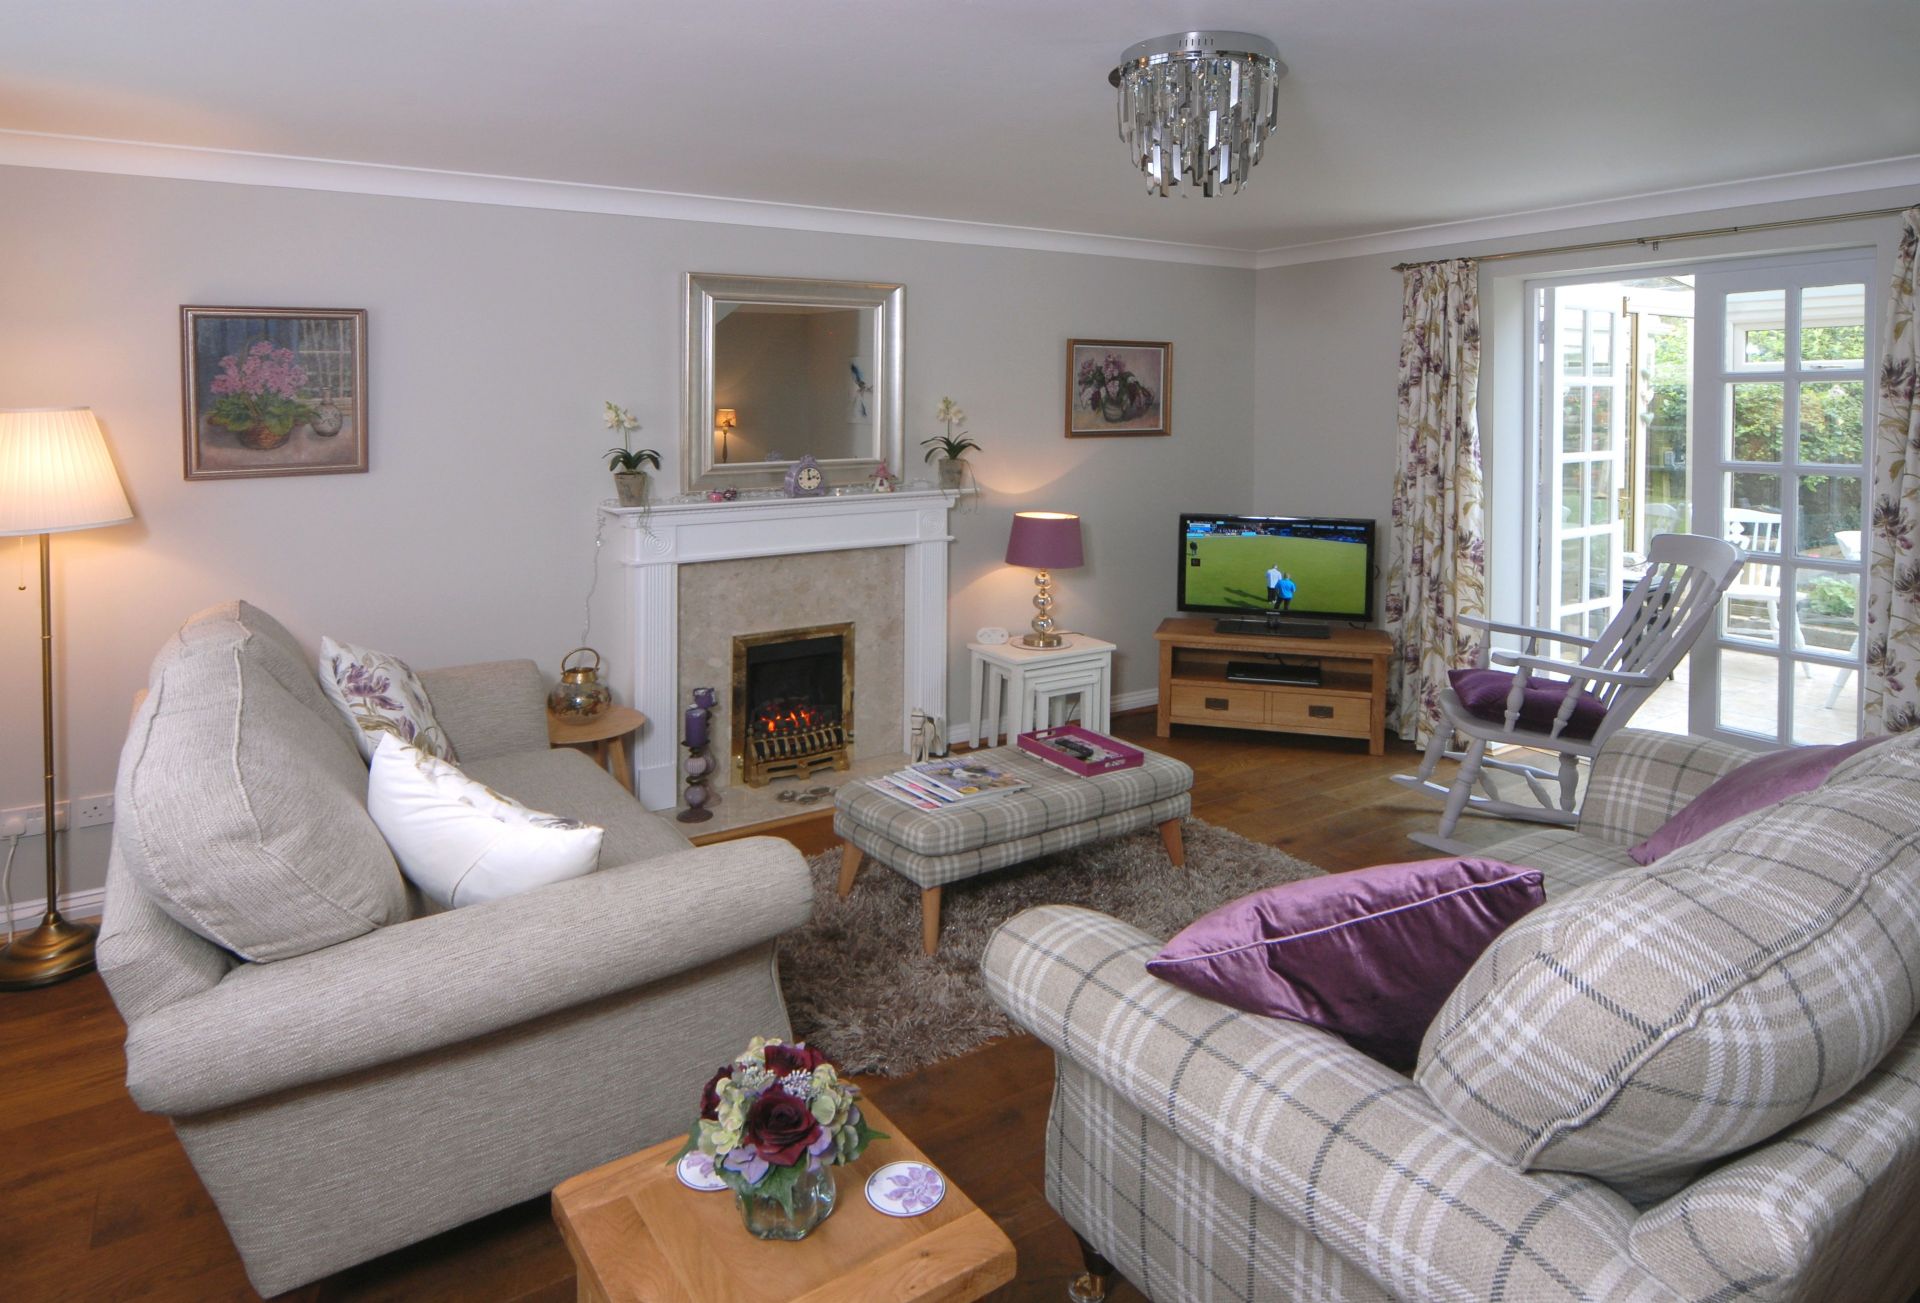 Details about a cottage Holiday at Little Shrublands